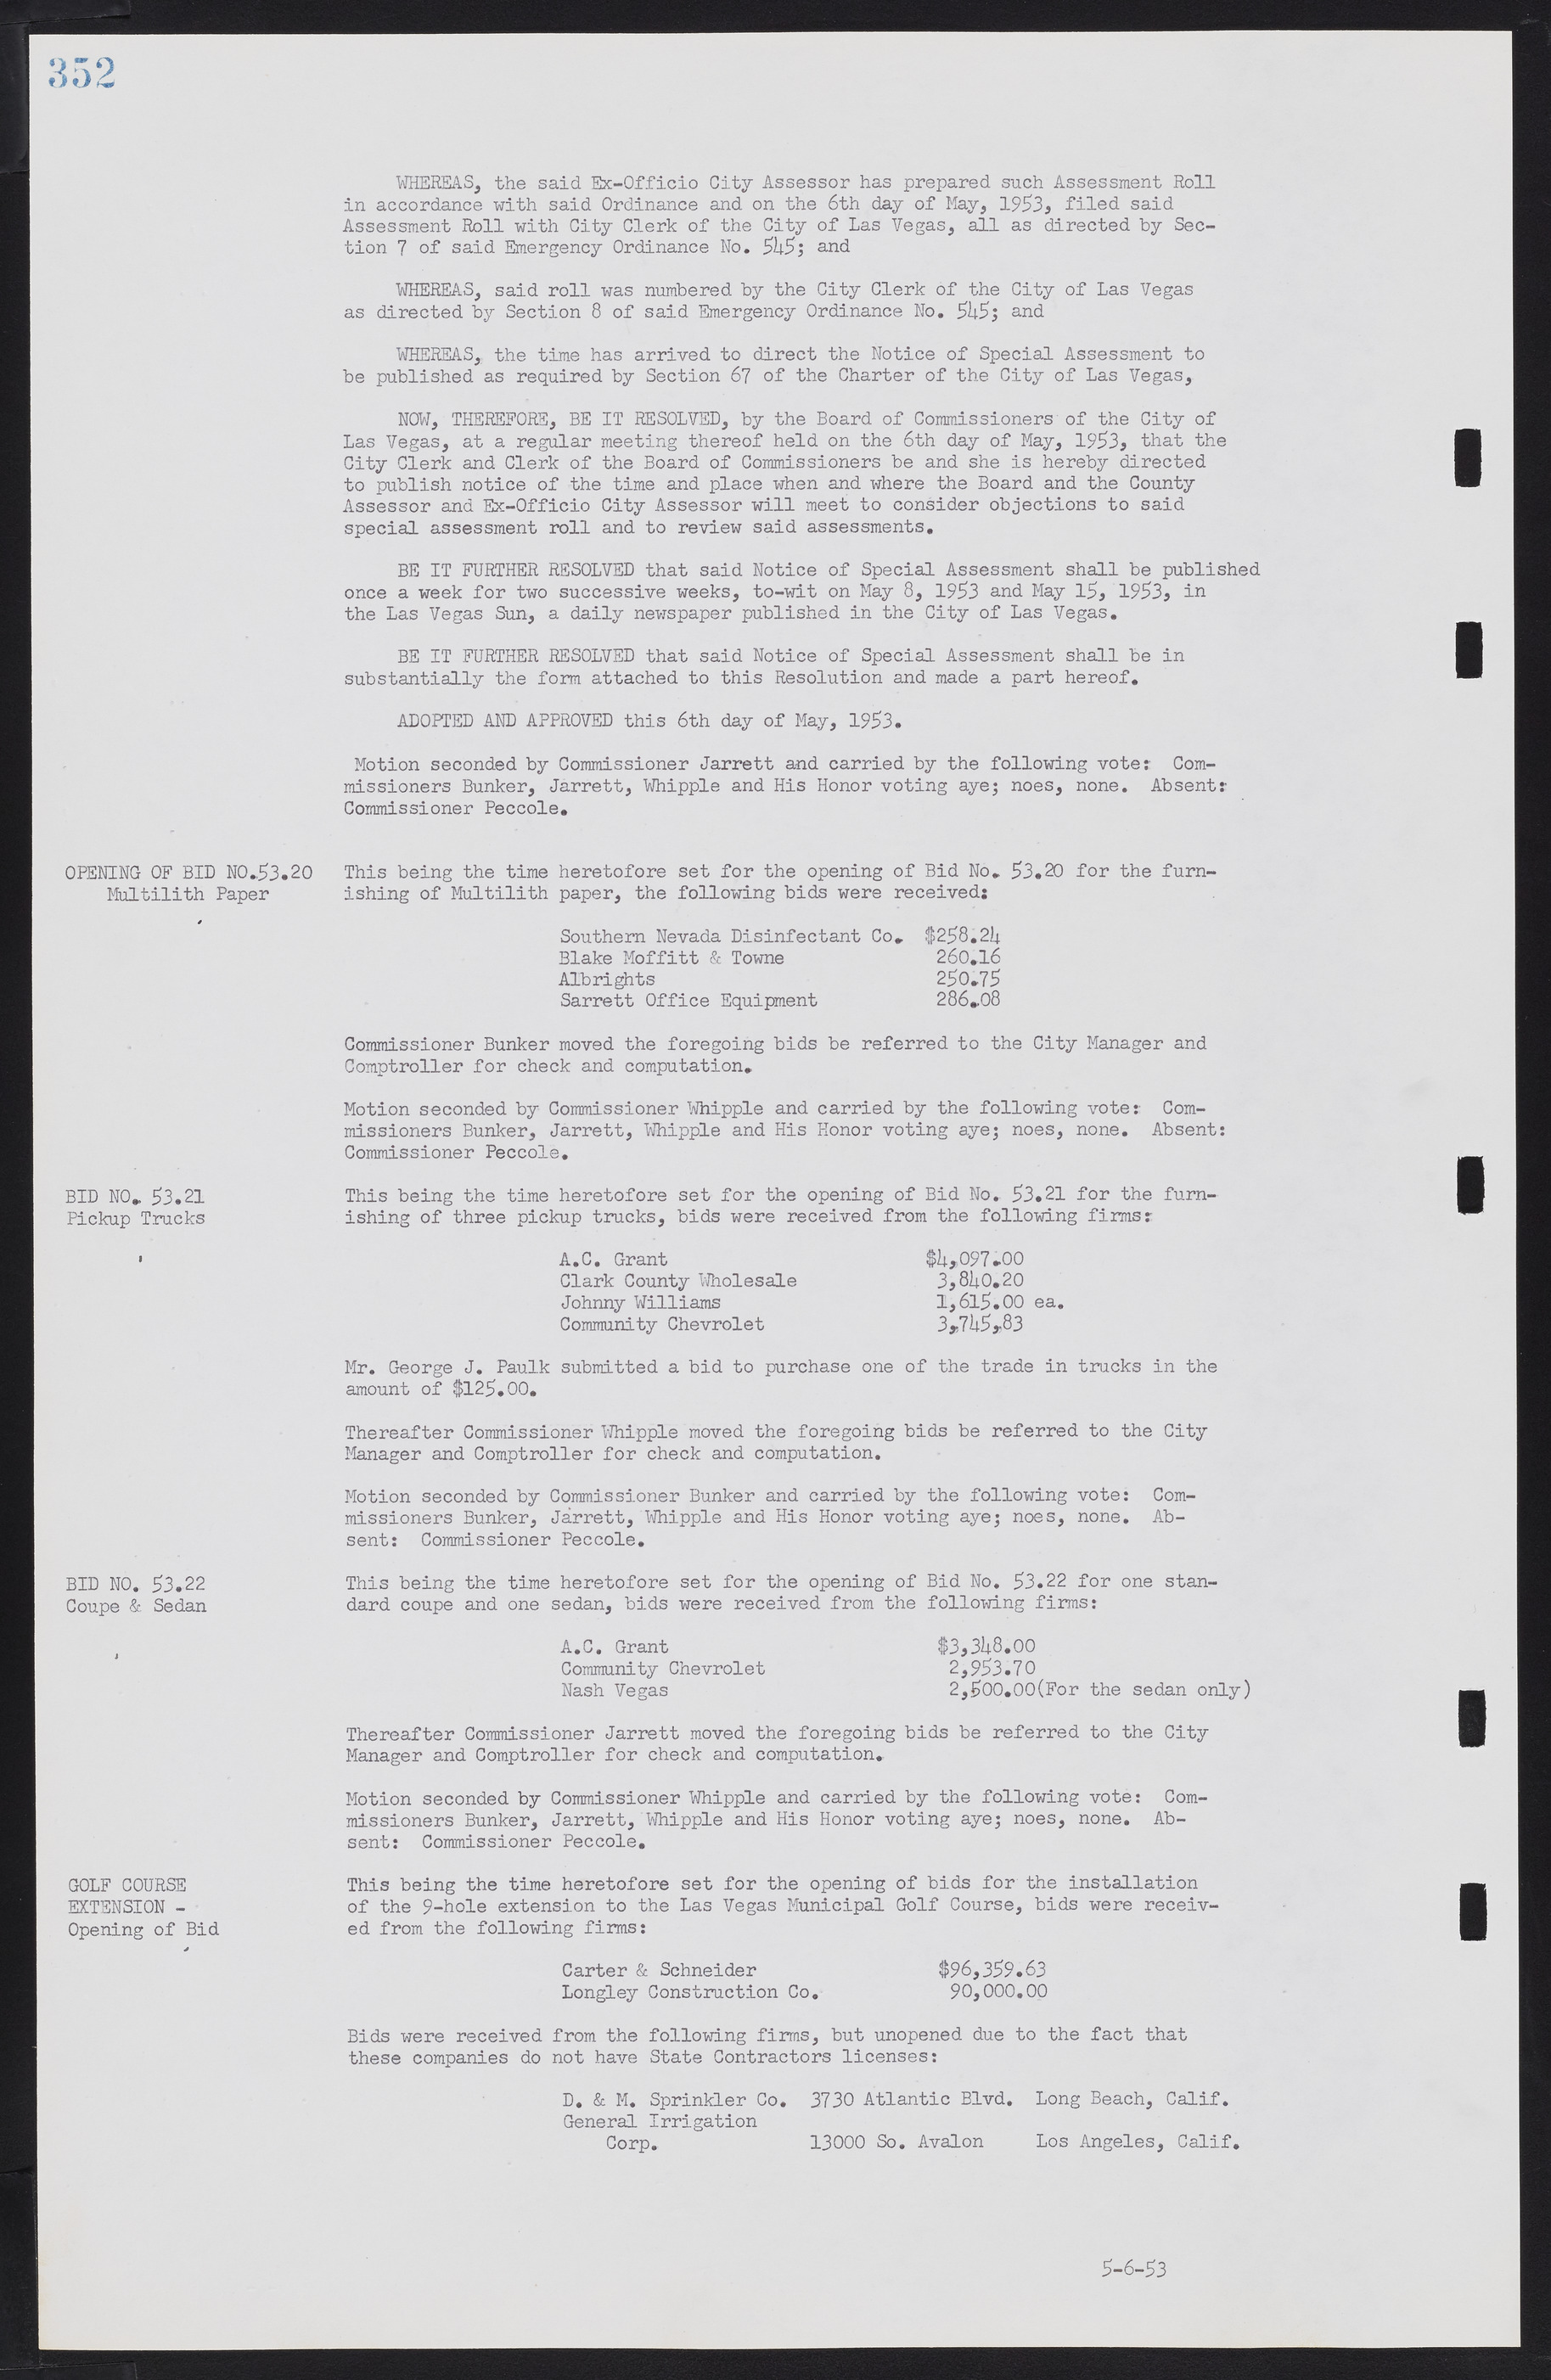 Las Vegas City Commission Minutes, May 26, 1952 to February 17, 1954, lvc000008-380